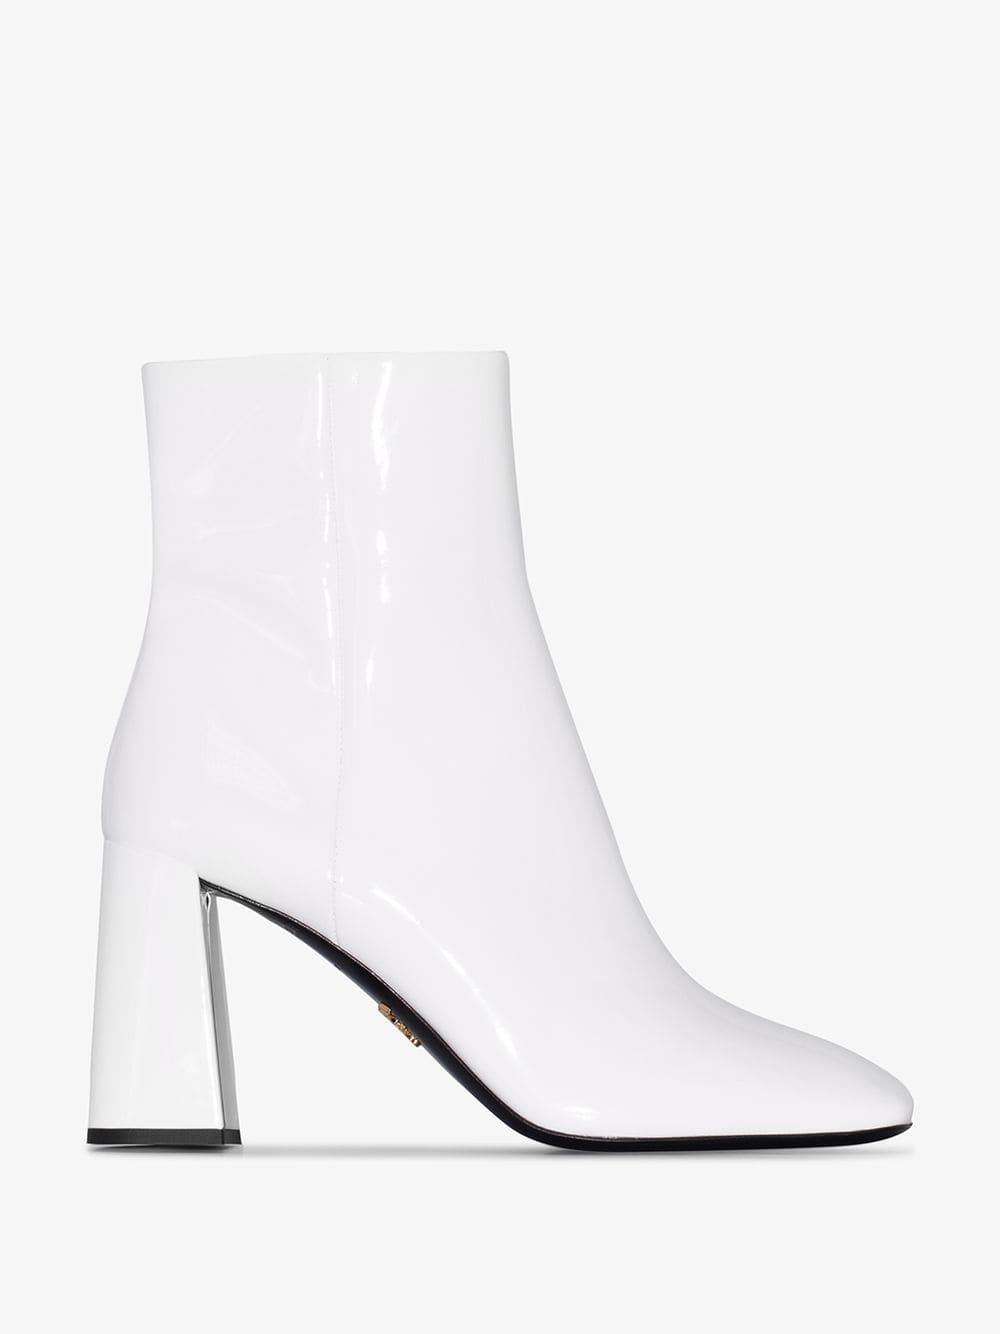 Prada White Patent Leather 85 Ankle Boots - Lyst